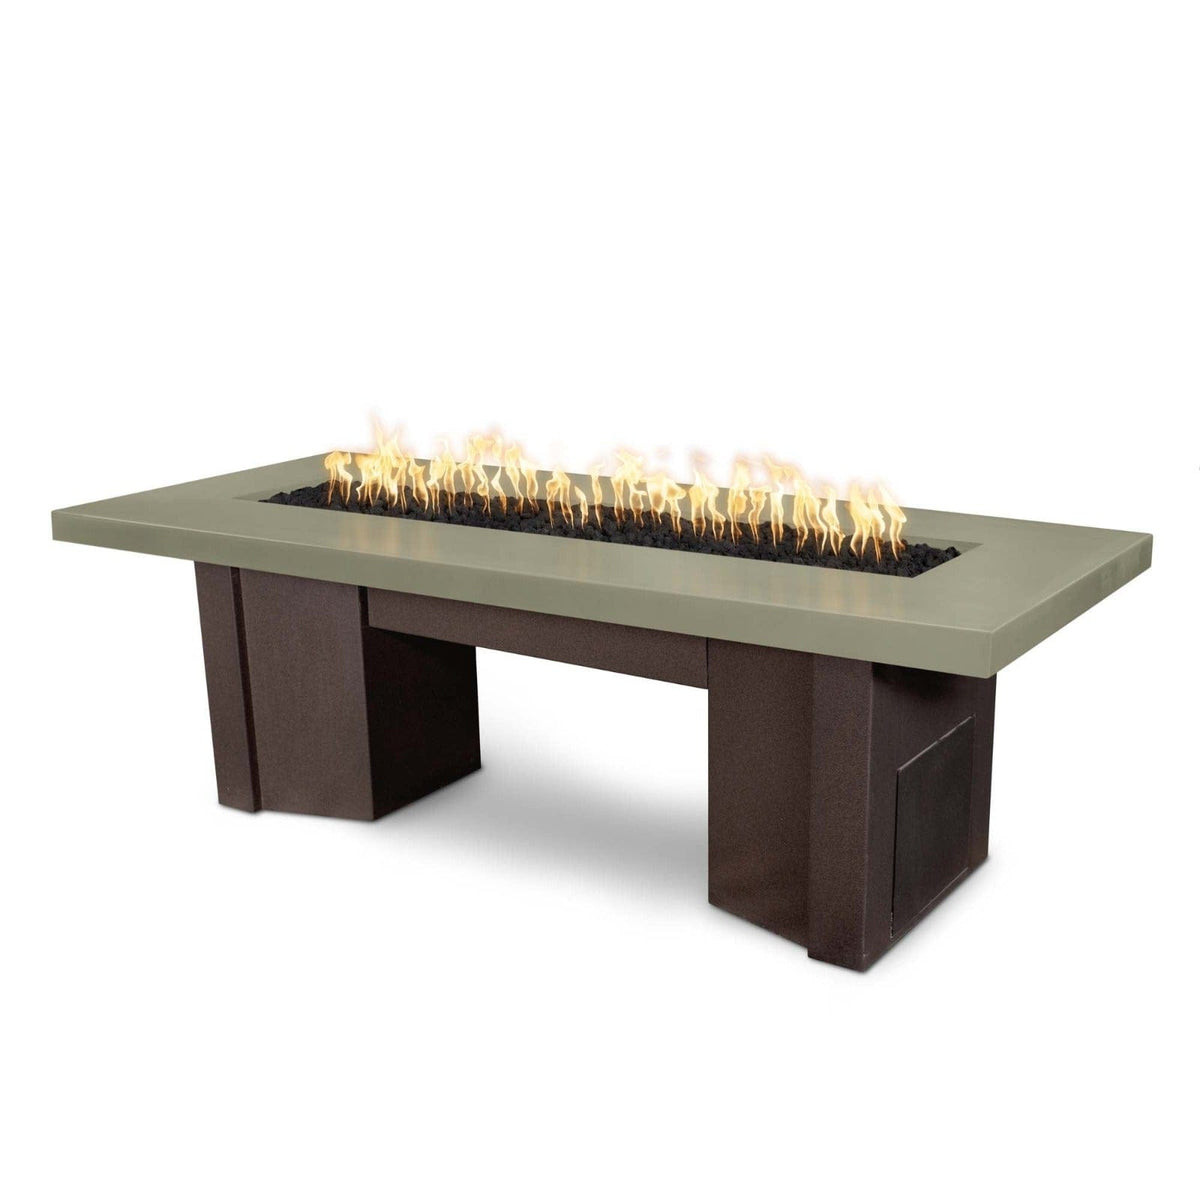 The Outdoor Plus Fire Features Ash (-ASH) / Java Powder Coated Steel (-JAV) The Outdoor Plus 60&quot; Alameda Fire Table Smooth Concrete in Natural Gas - Flame Sense System with Push Button Spark Igniter / OPT-ALMGFRC60FSEN-NG